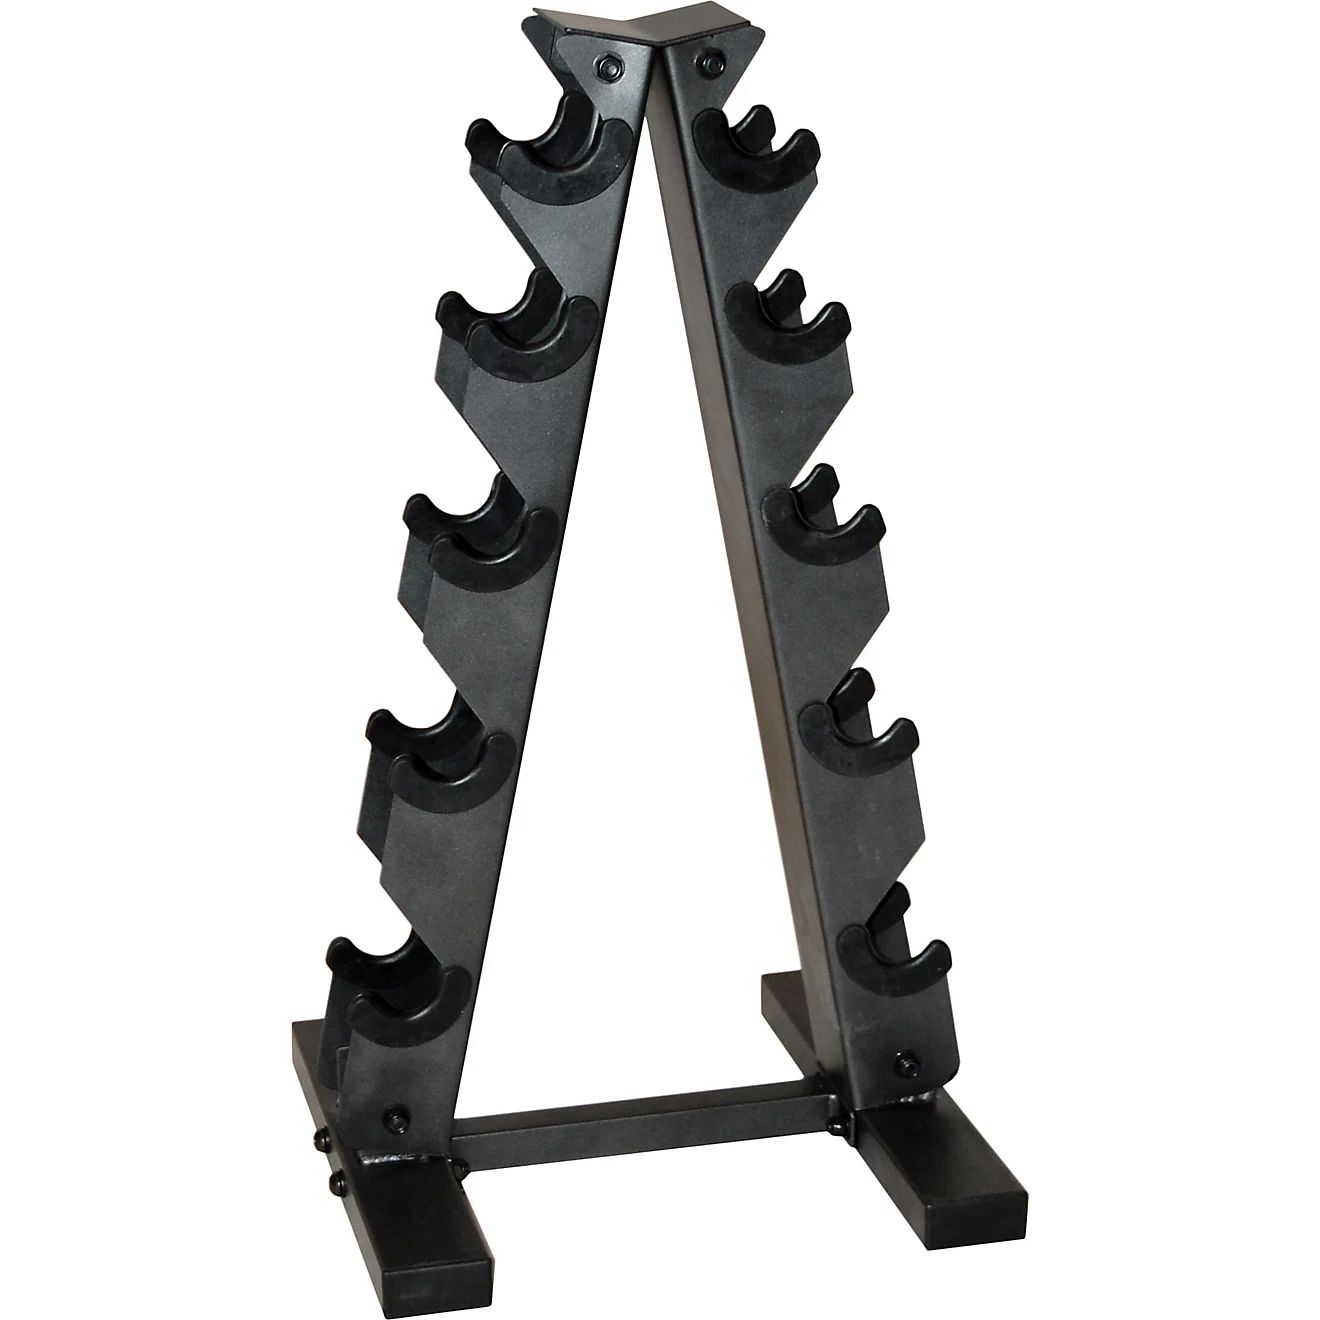 CAP Barbell "A" Frame Dumbbell Rack | Academy Sports + Outdoors